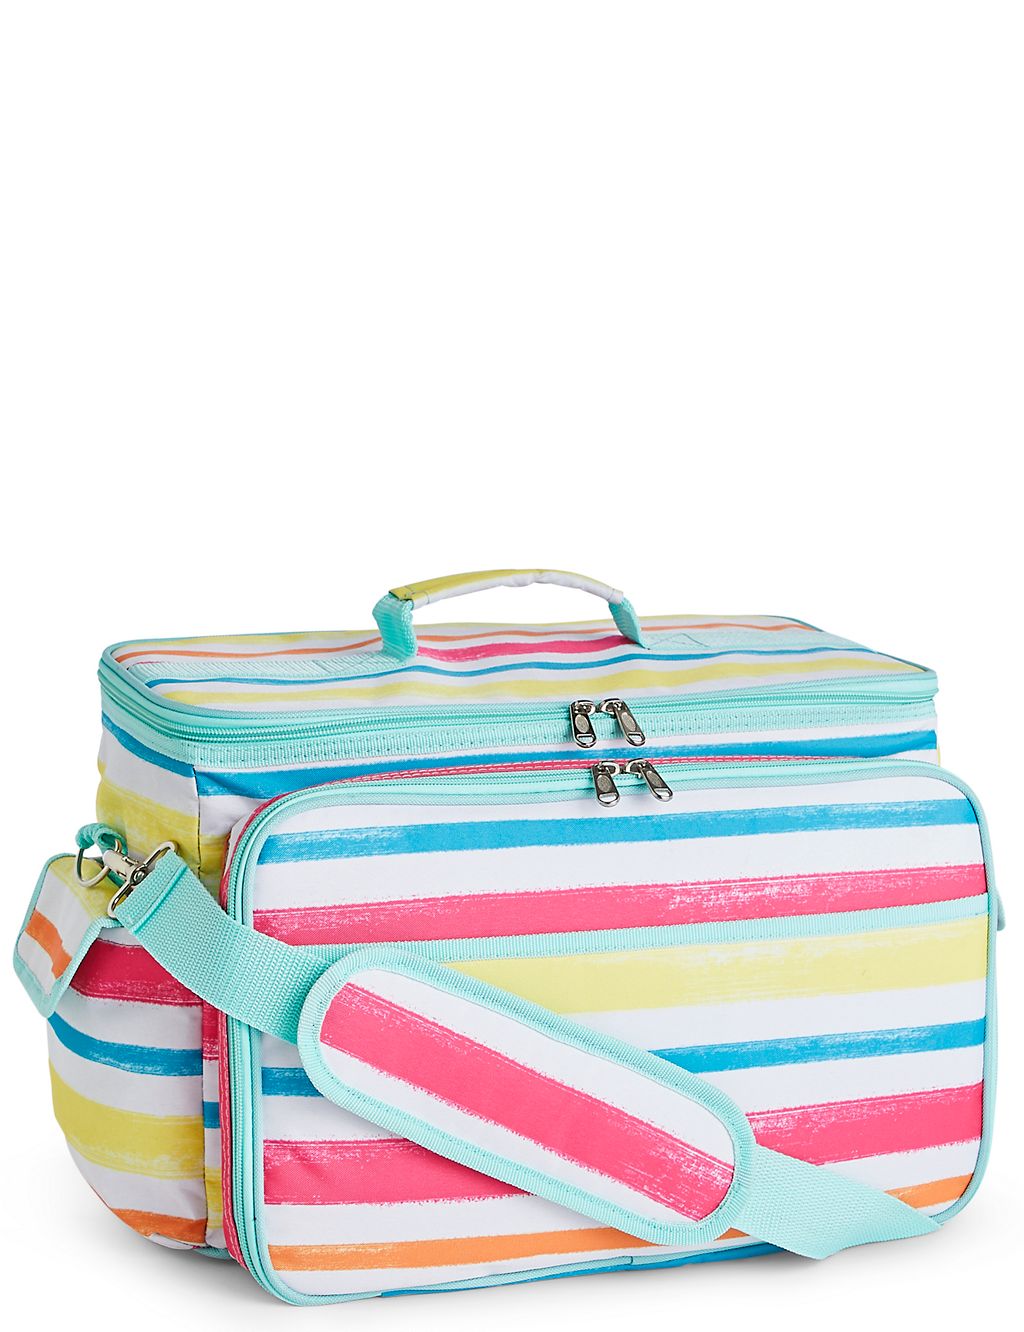 Striped 4 Person Family Cool Bag 1 of 4